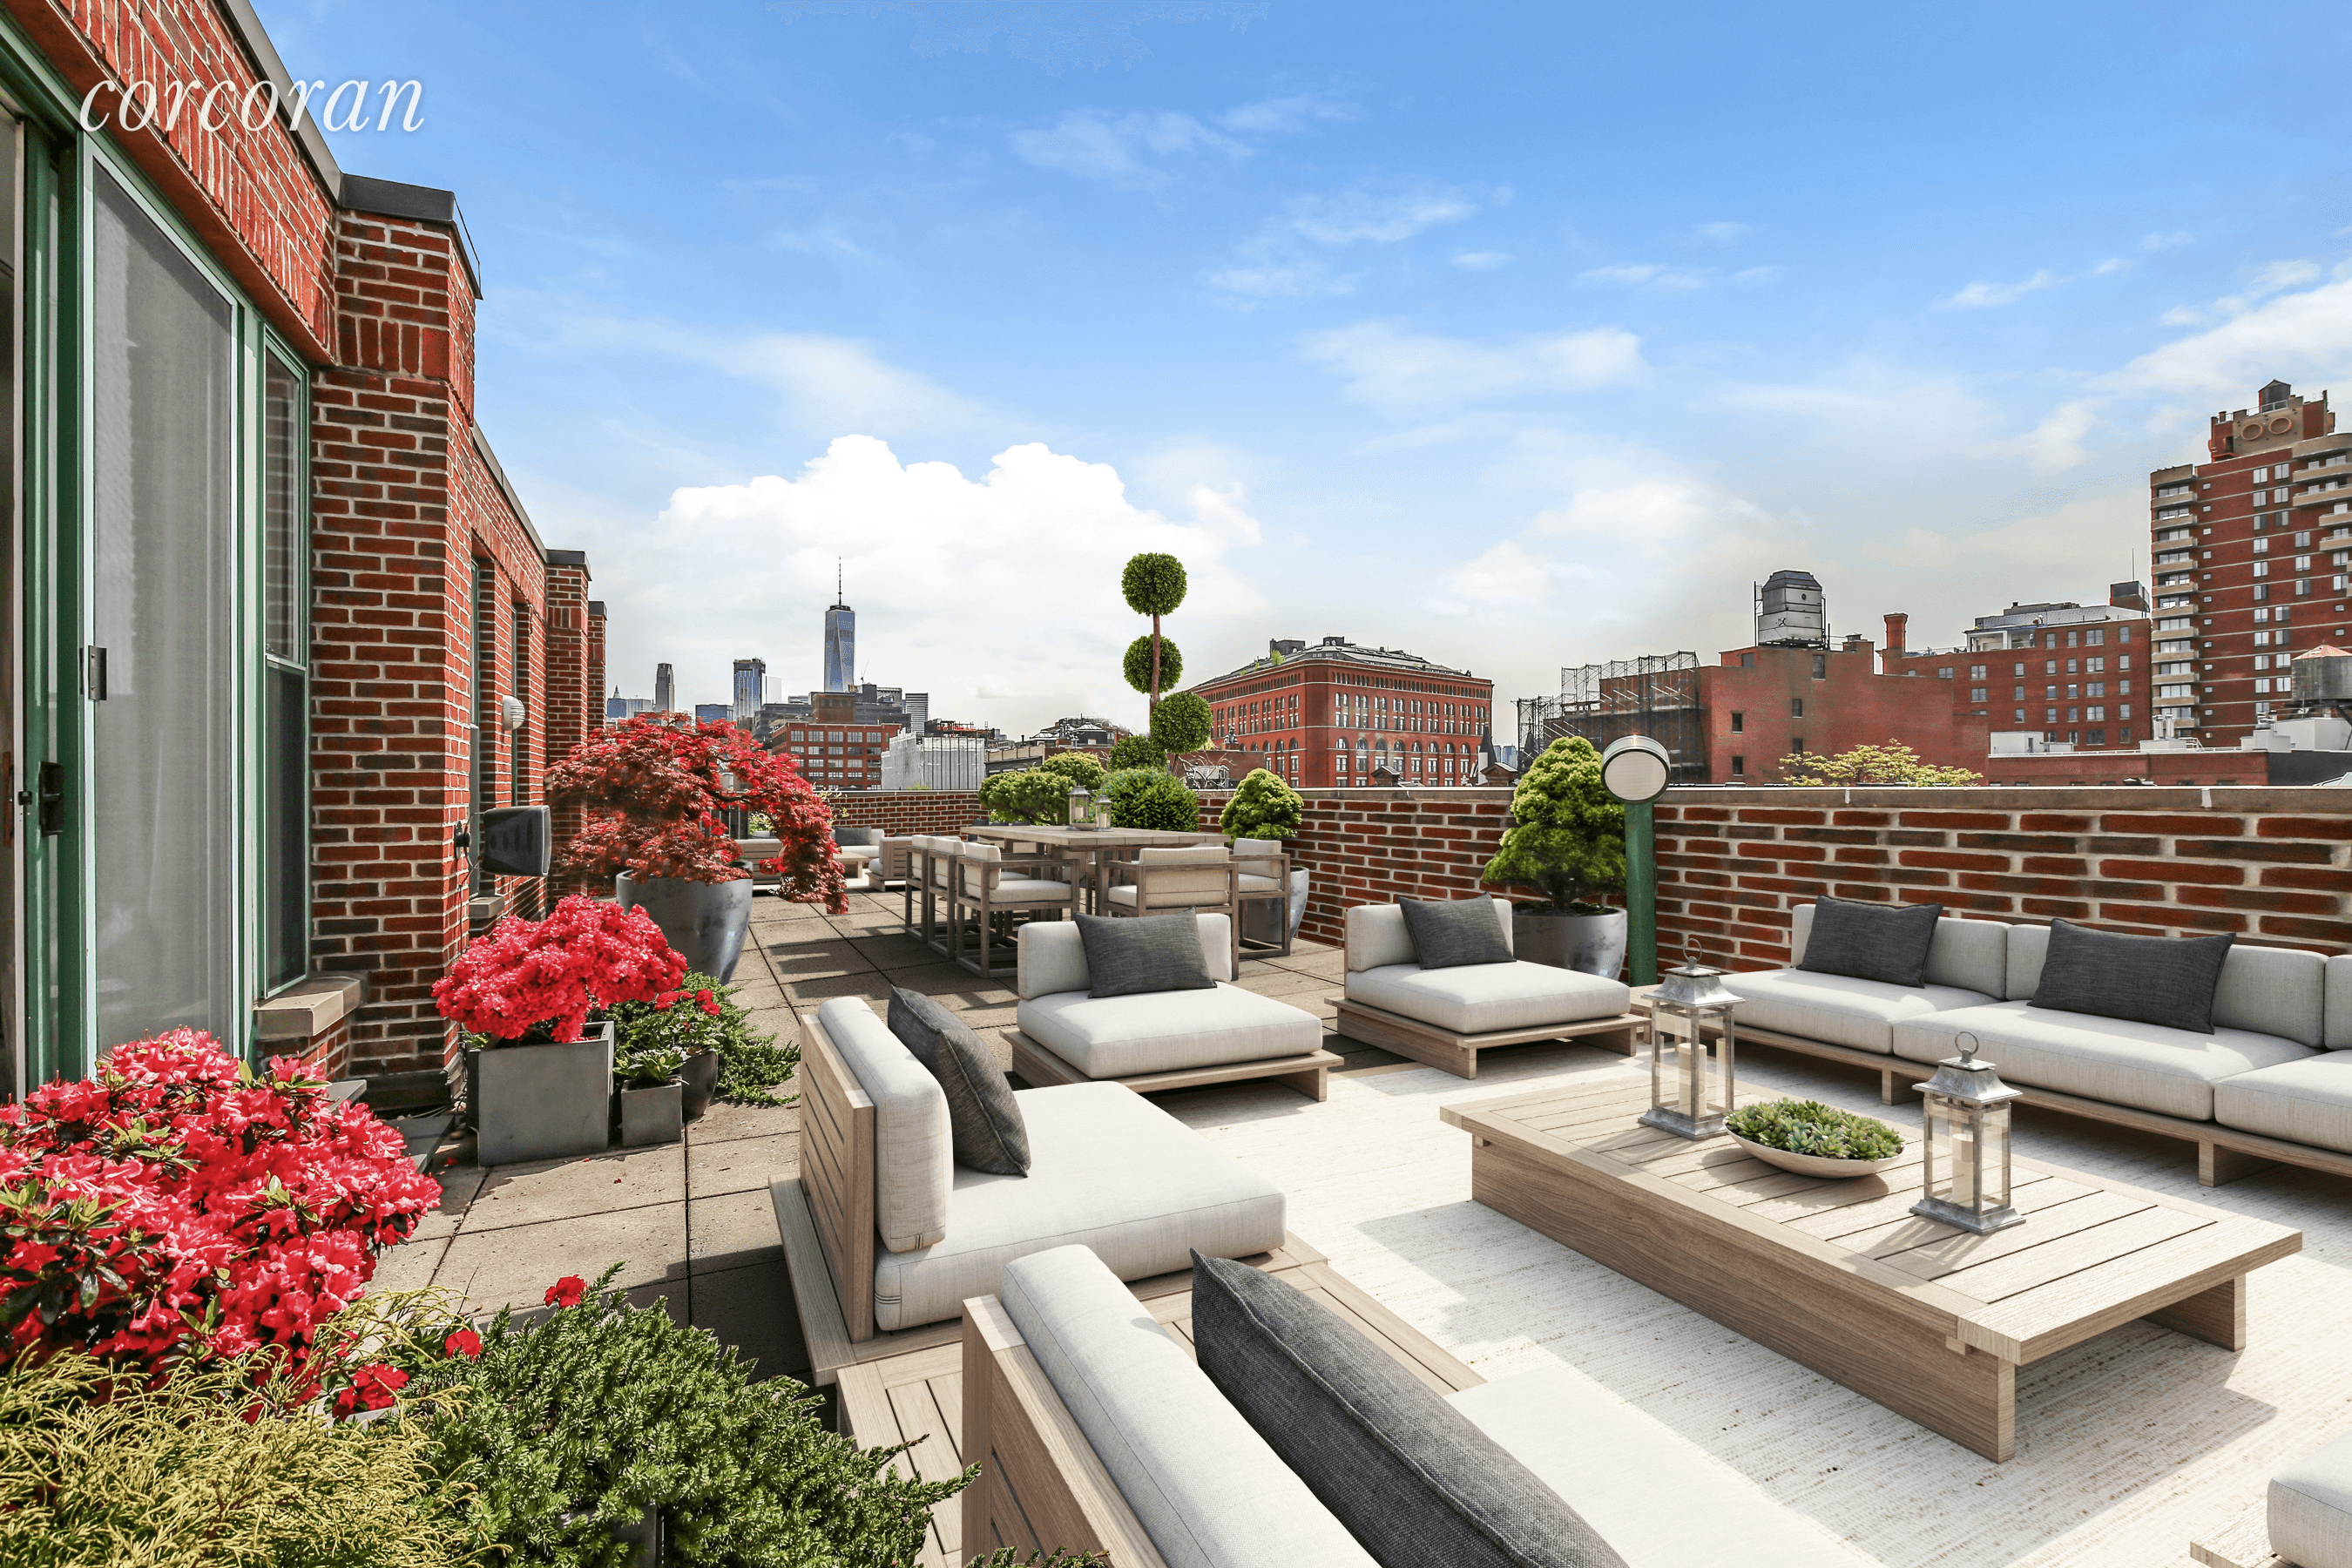 This spectacular West Village penthouse loft features 3, 665 SF of combined indoor outdoor living space perfect for entertaining or enjoying time outdoors on the heart of Hudson.